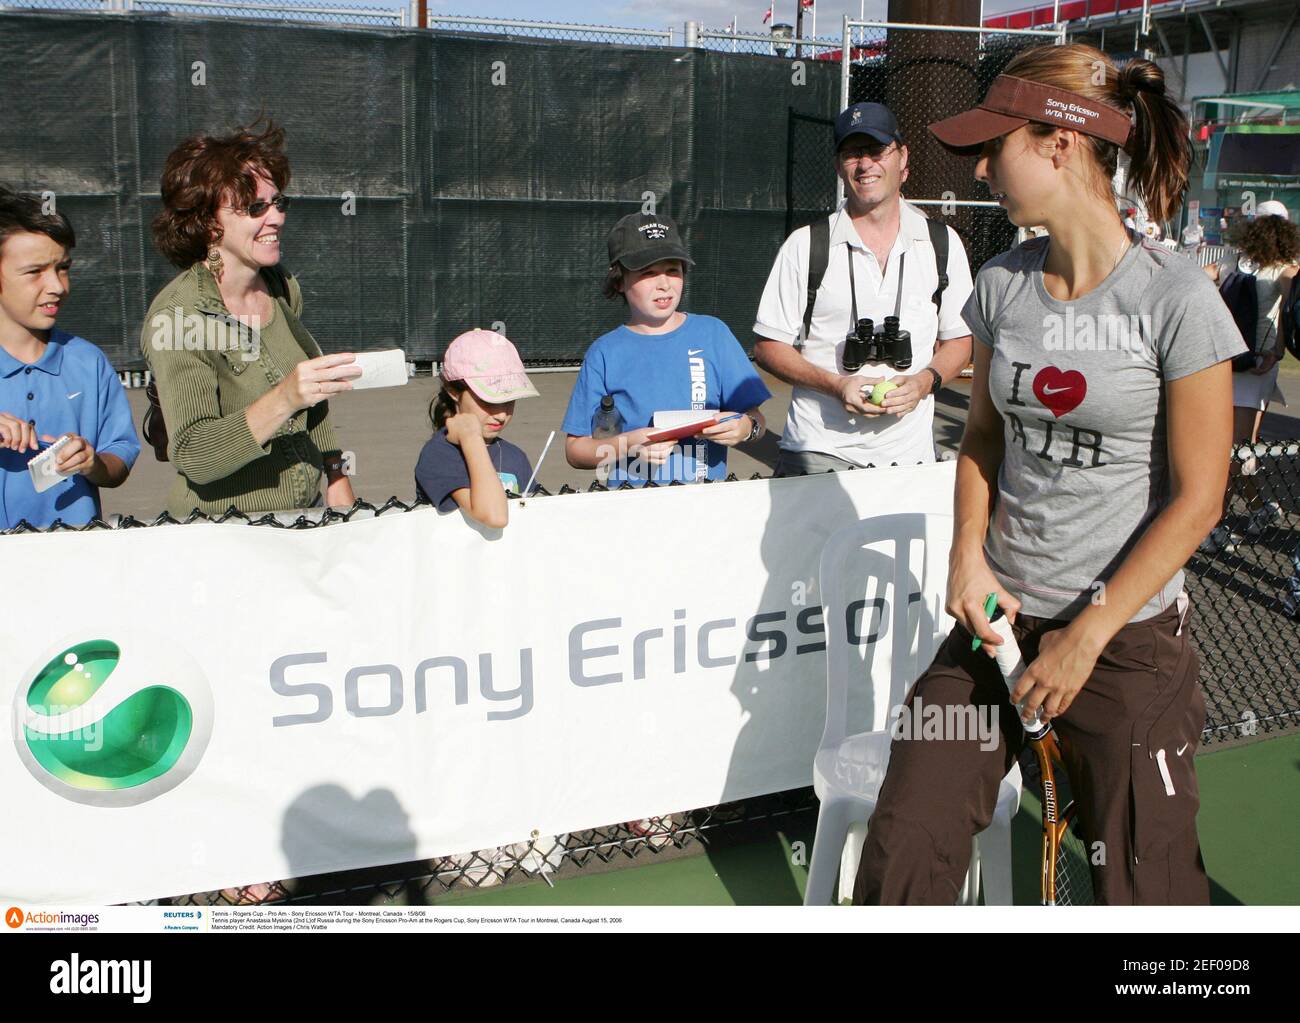 Tennis - Rogers Cup - Pro Am - Sony Ericsson WTA Tour - Montreal, Canada - 15/8/06  Tennis player Anastasia Myskina (2nd L)of Russia during the Sony Ericsson Pro-Am at the Rogers Cup, Sony Ericsson WTA Tour in Montreal, Canada August 15, 2006  Mandatory Credit: Action Images / Chris Wattie Stock Photo